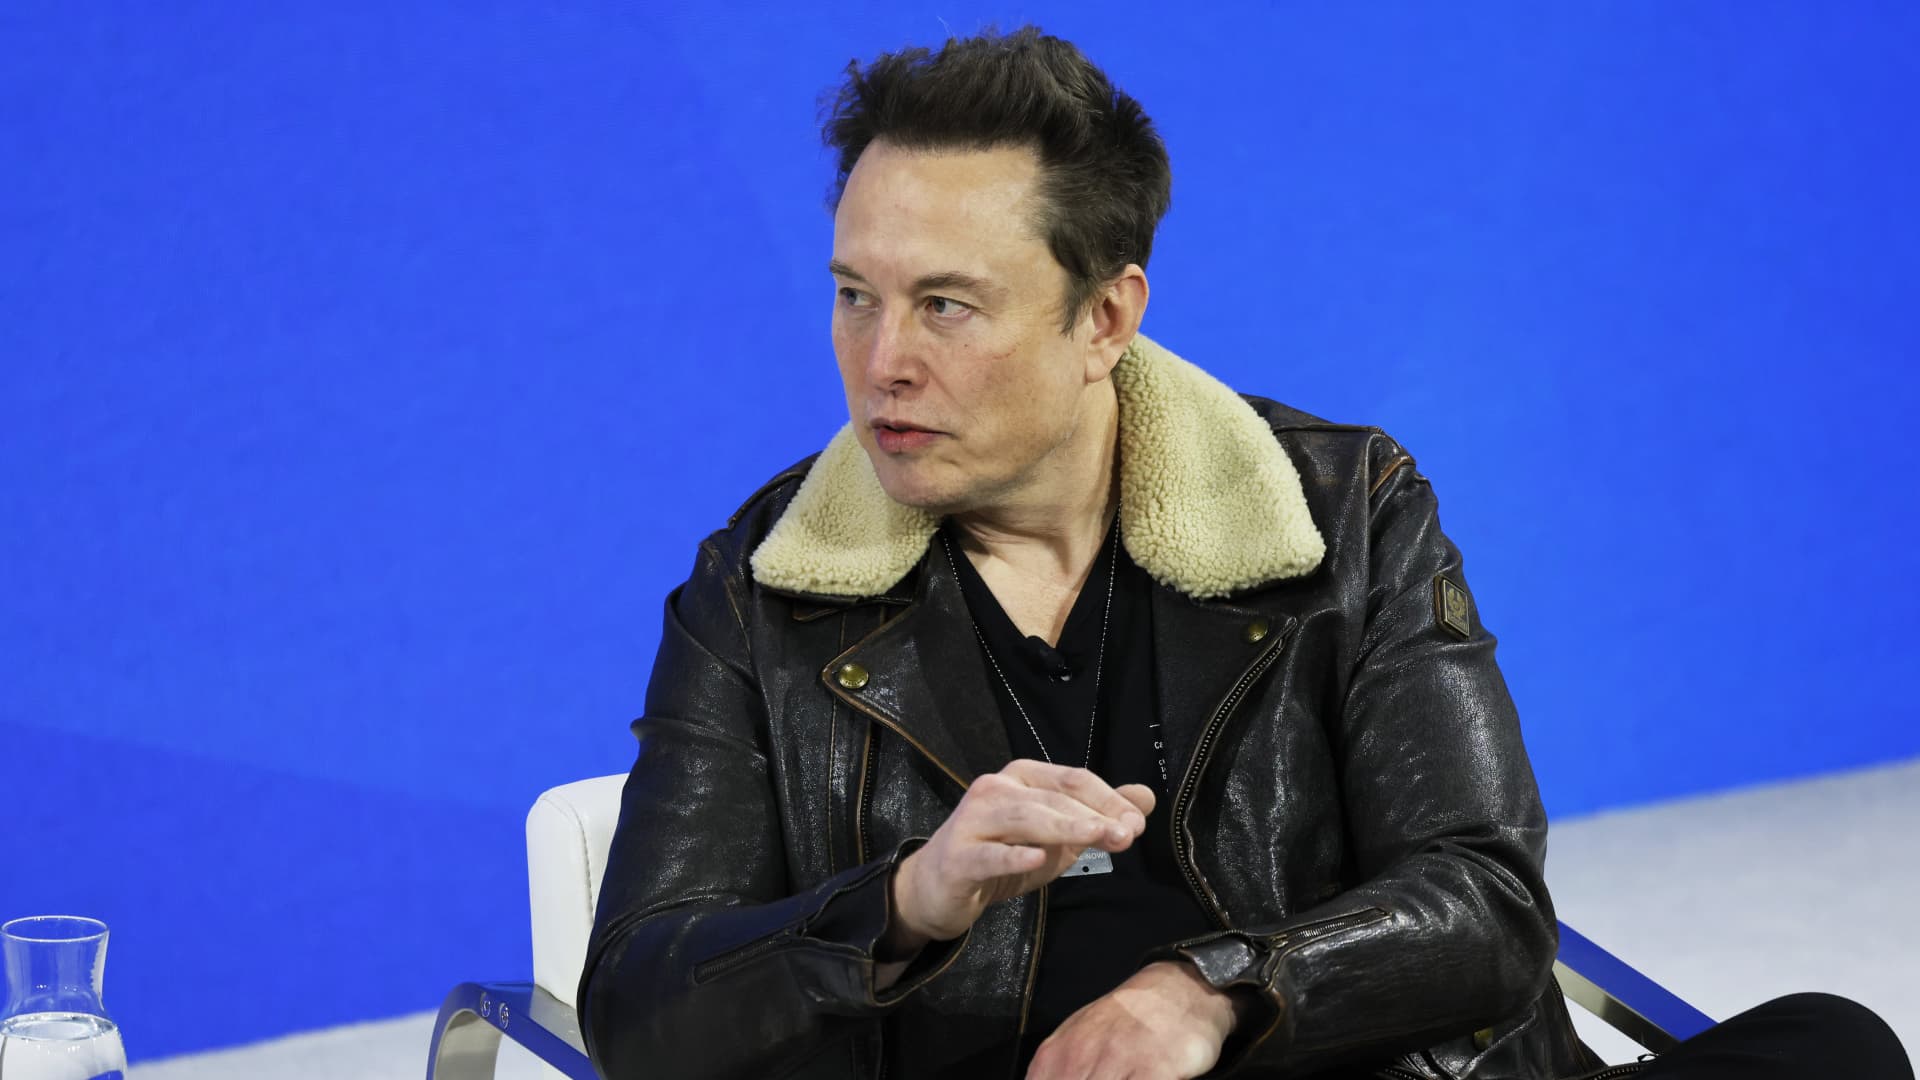 Elon Musk claims advertisers are trying to ‘blackmail’ him, says ‘Go f— yourself’